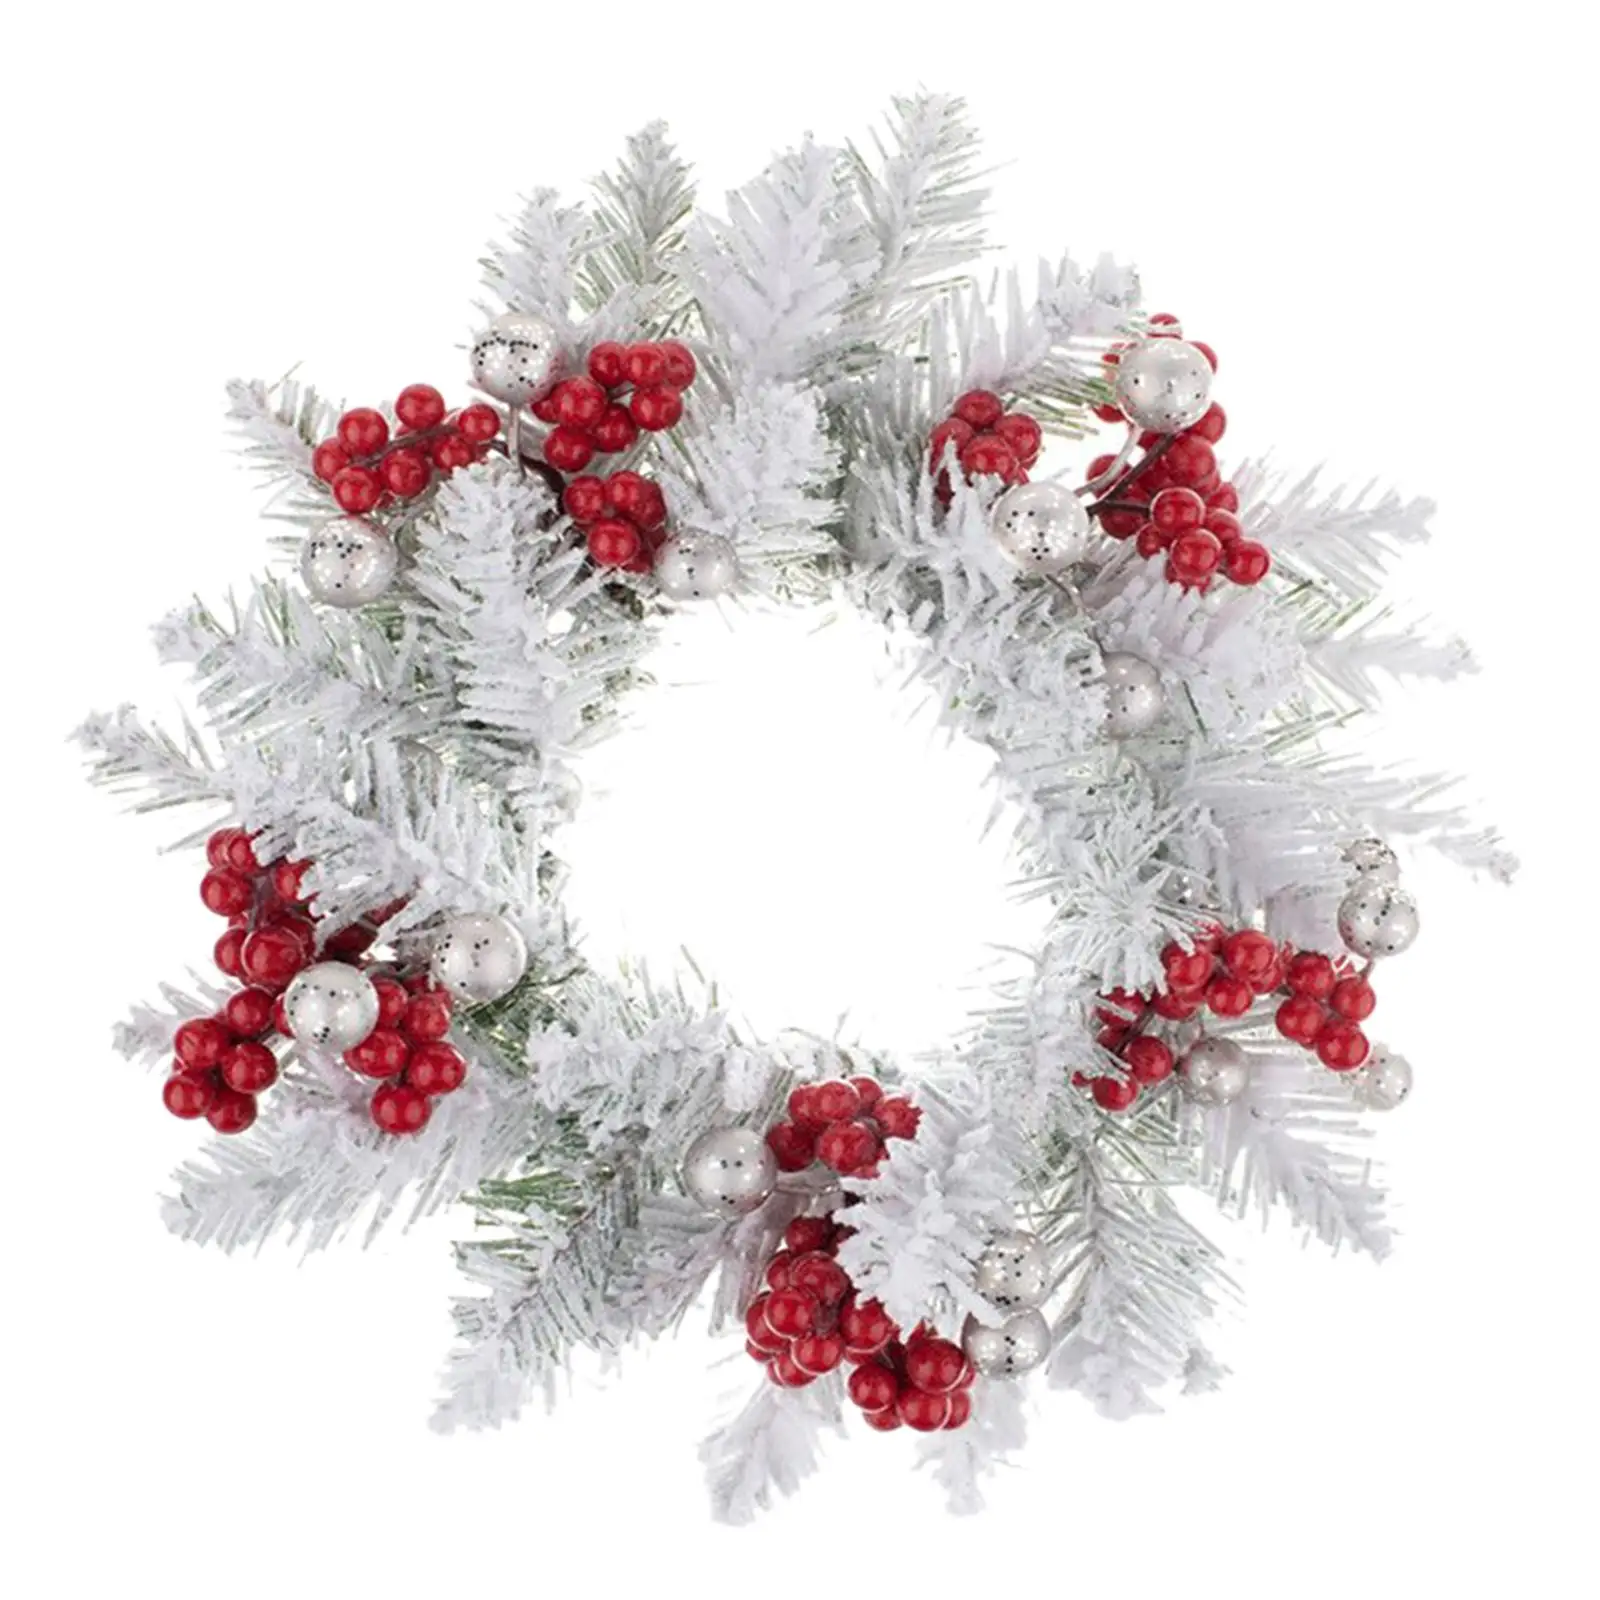 Christmas Candle Wreath Candles Holder Decorative Creative Candlestick Wreath for Table Centerpiece Parties Home Door Wedding